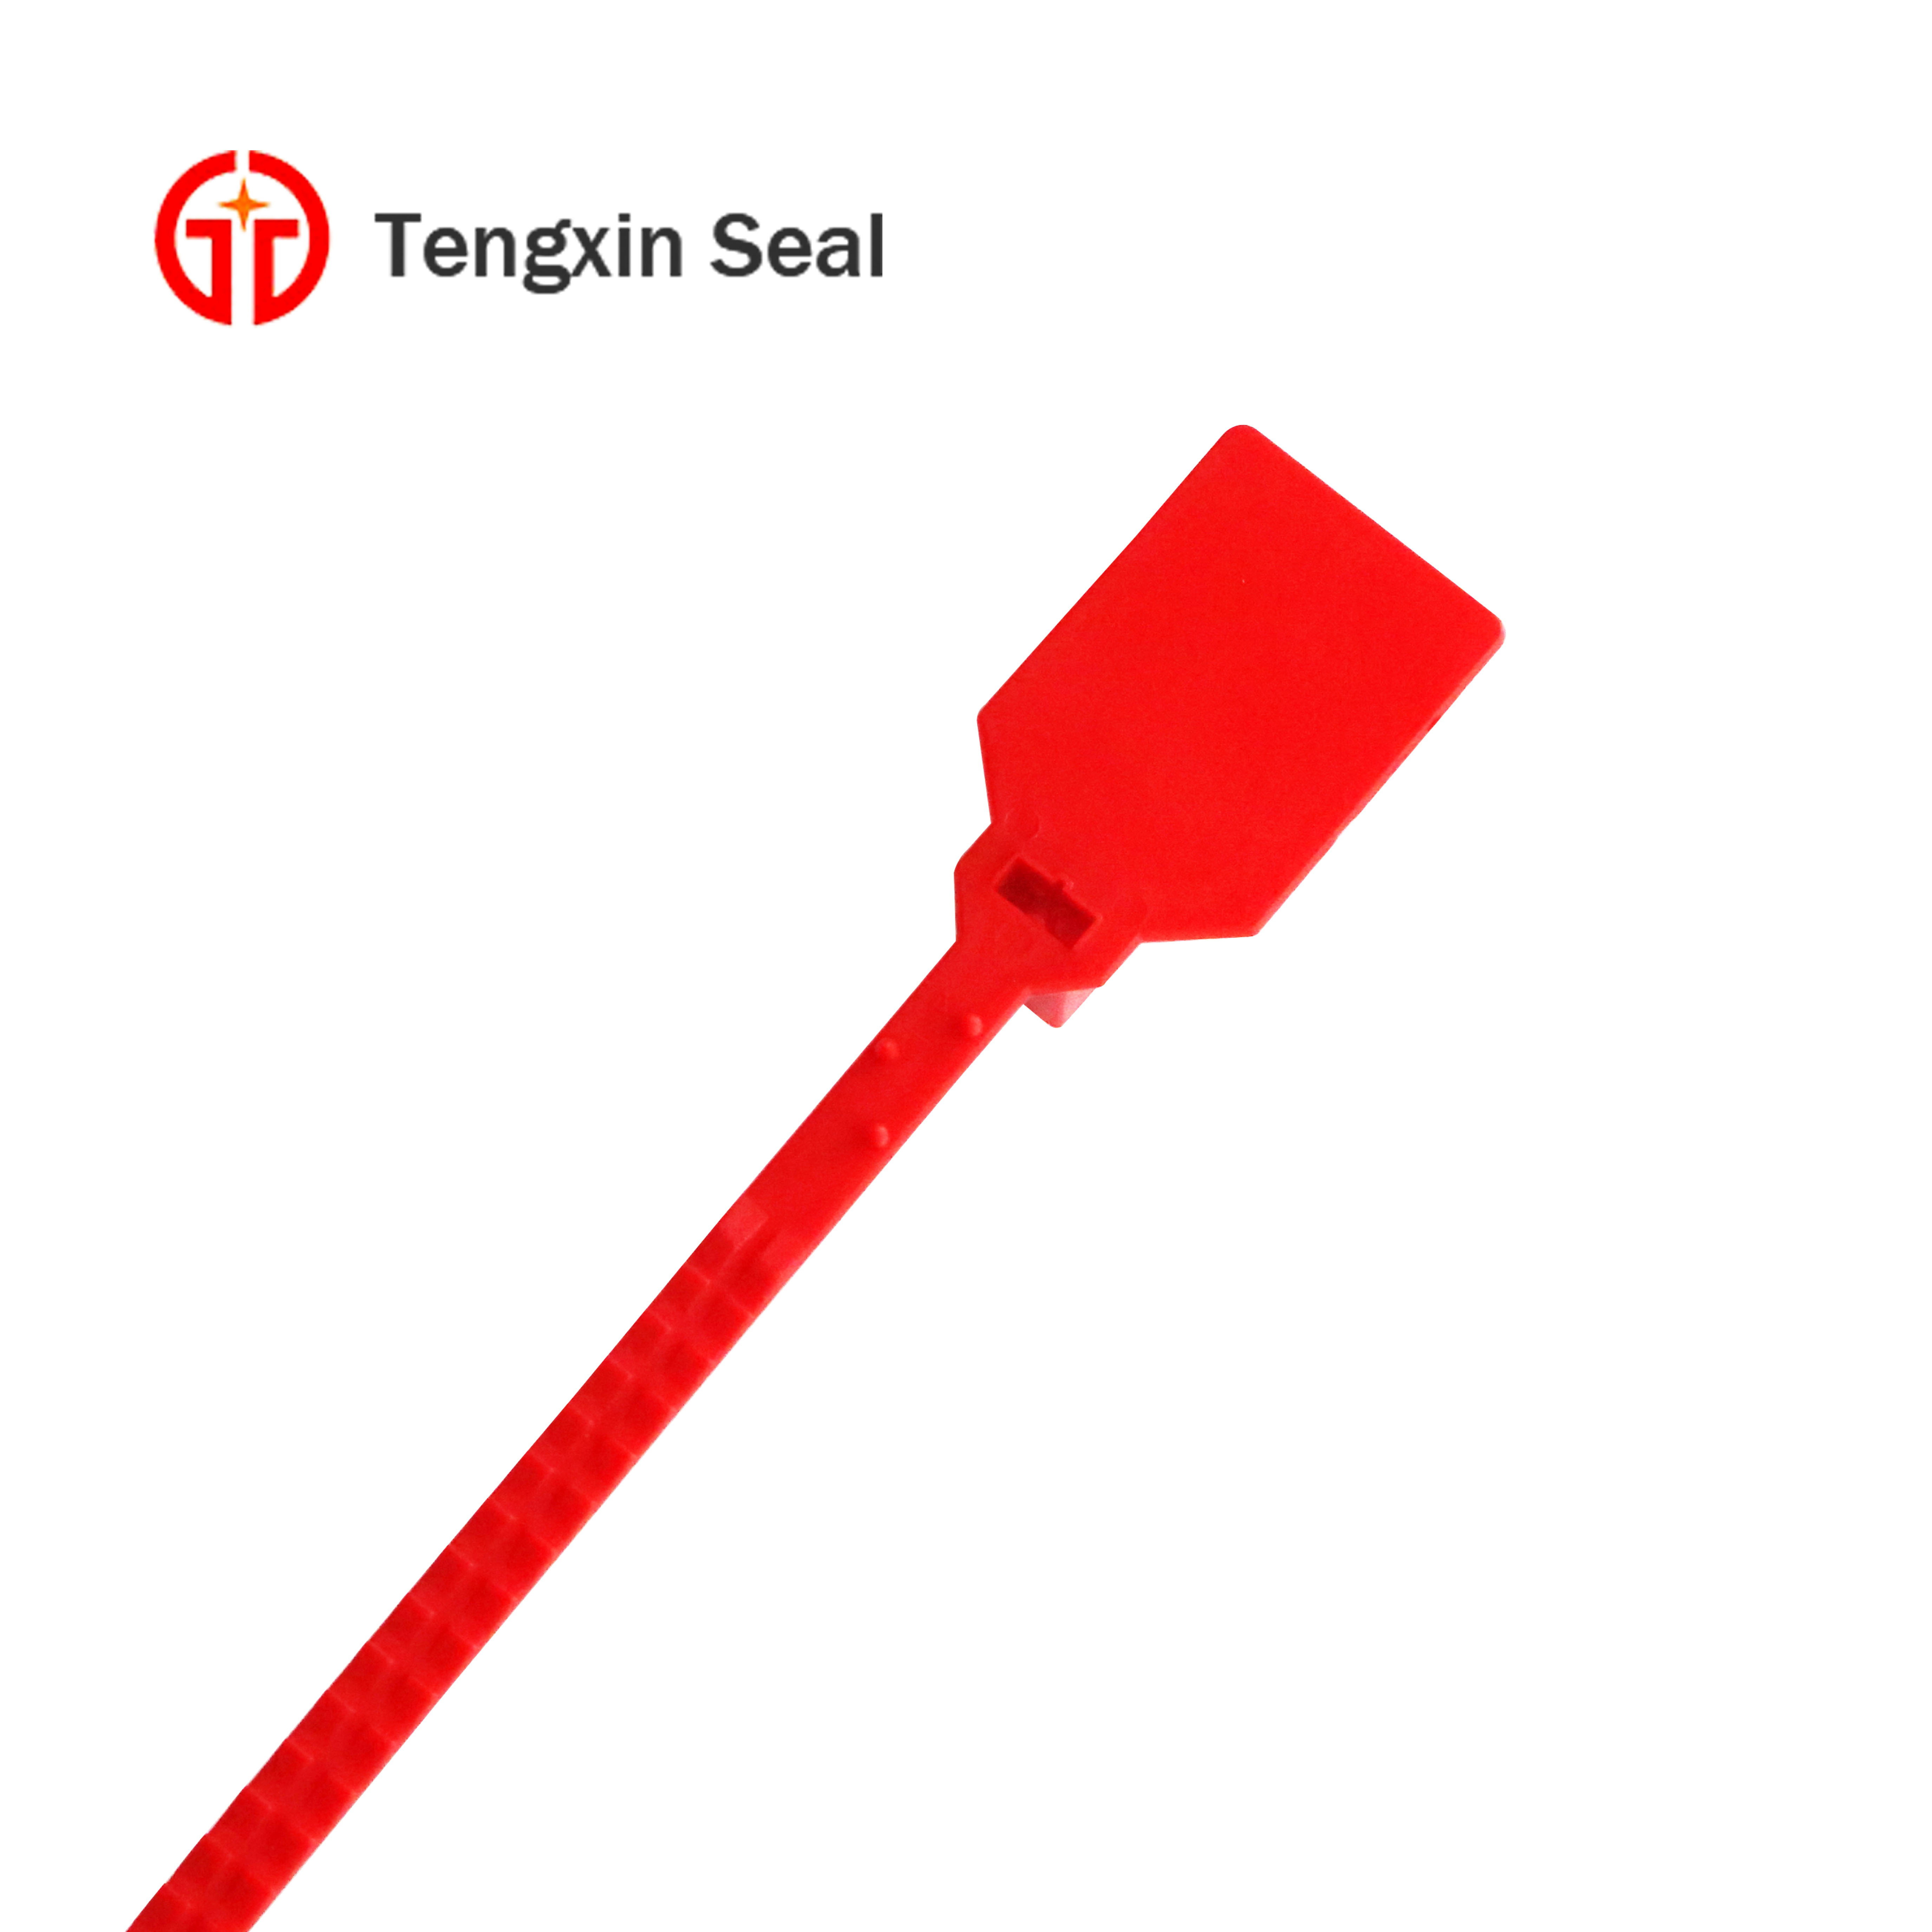 TX-PS101 Heavy Duty Security Plastic Seal